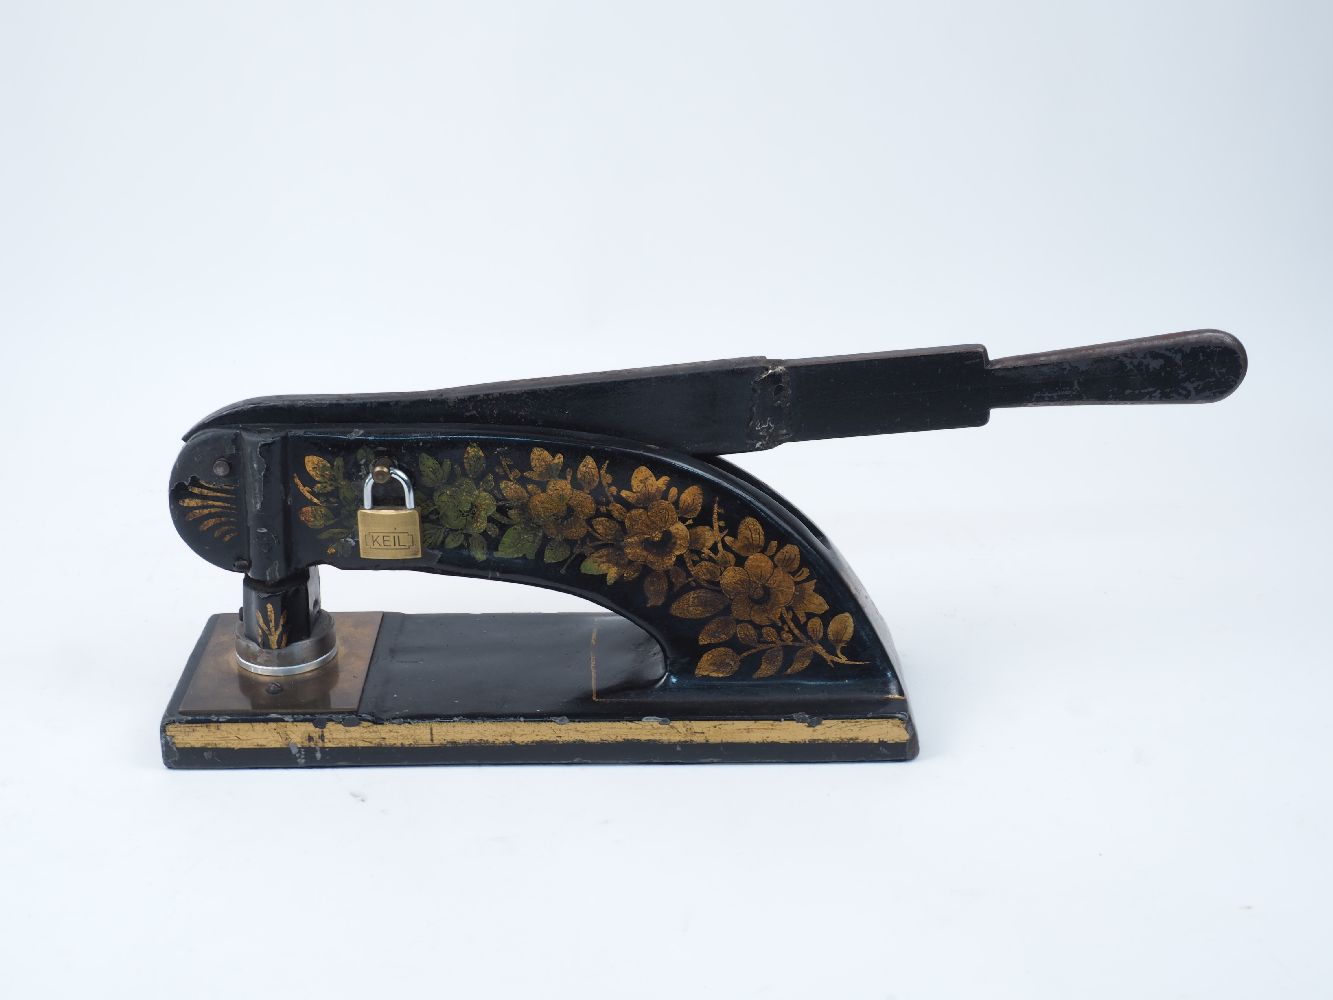 A Victorian embossing press for company seals, late 19th century, cast iron with japanned decoration